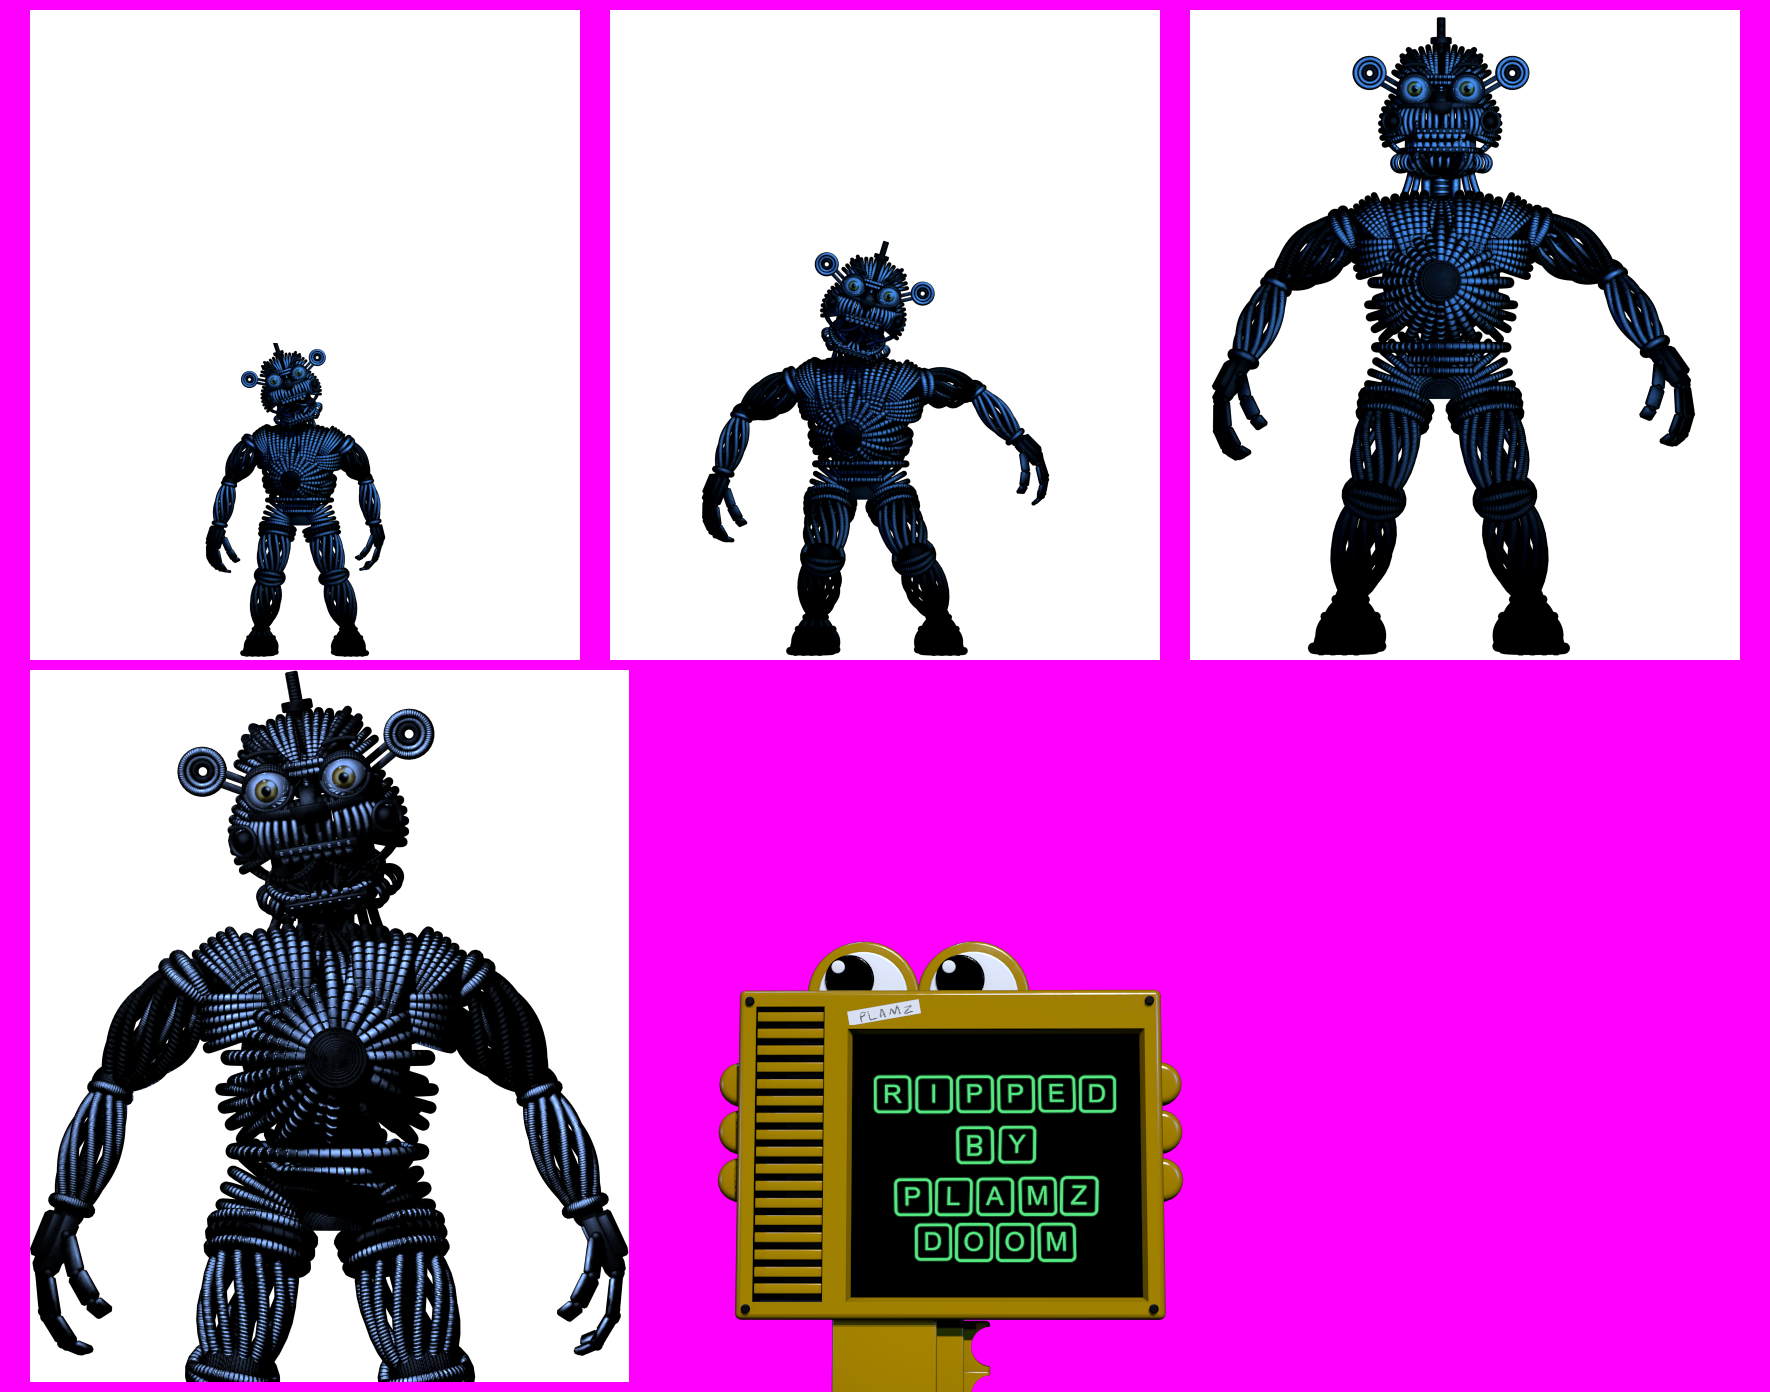 Five Nights at Freddy's: Sister Location - Yenndo